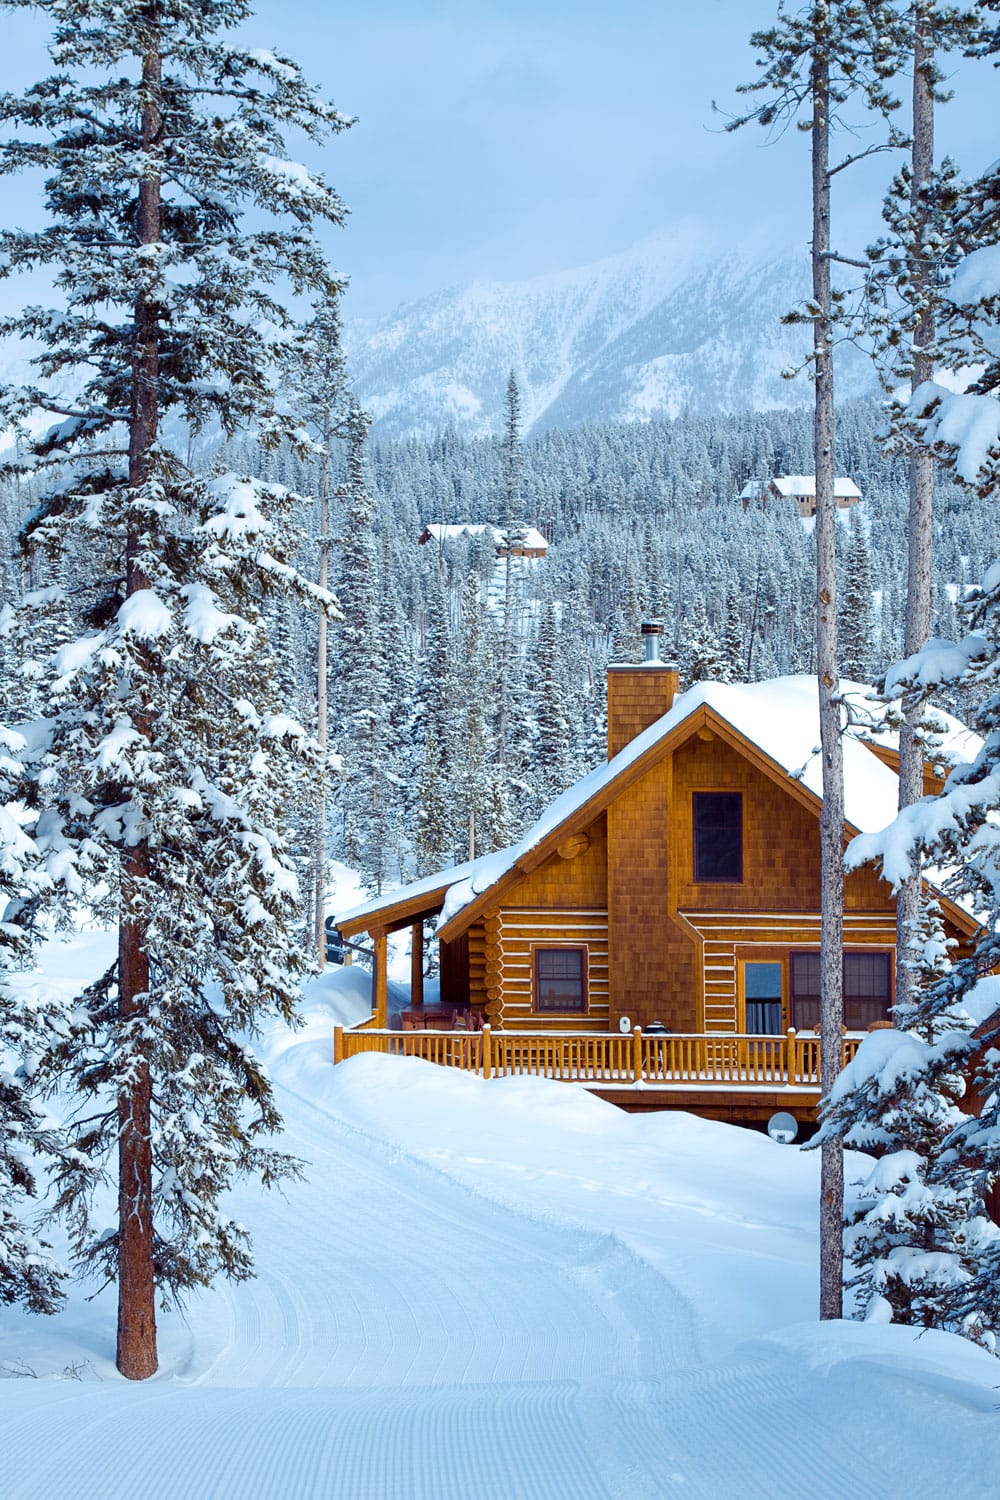 A gorgeous log cabin in a rocky mountain